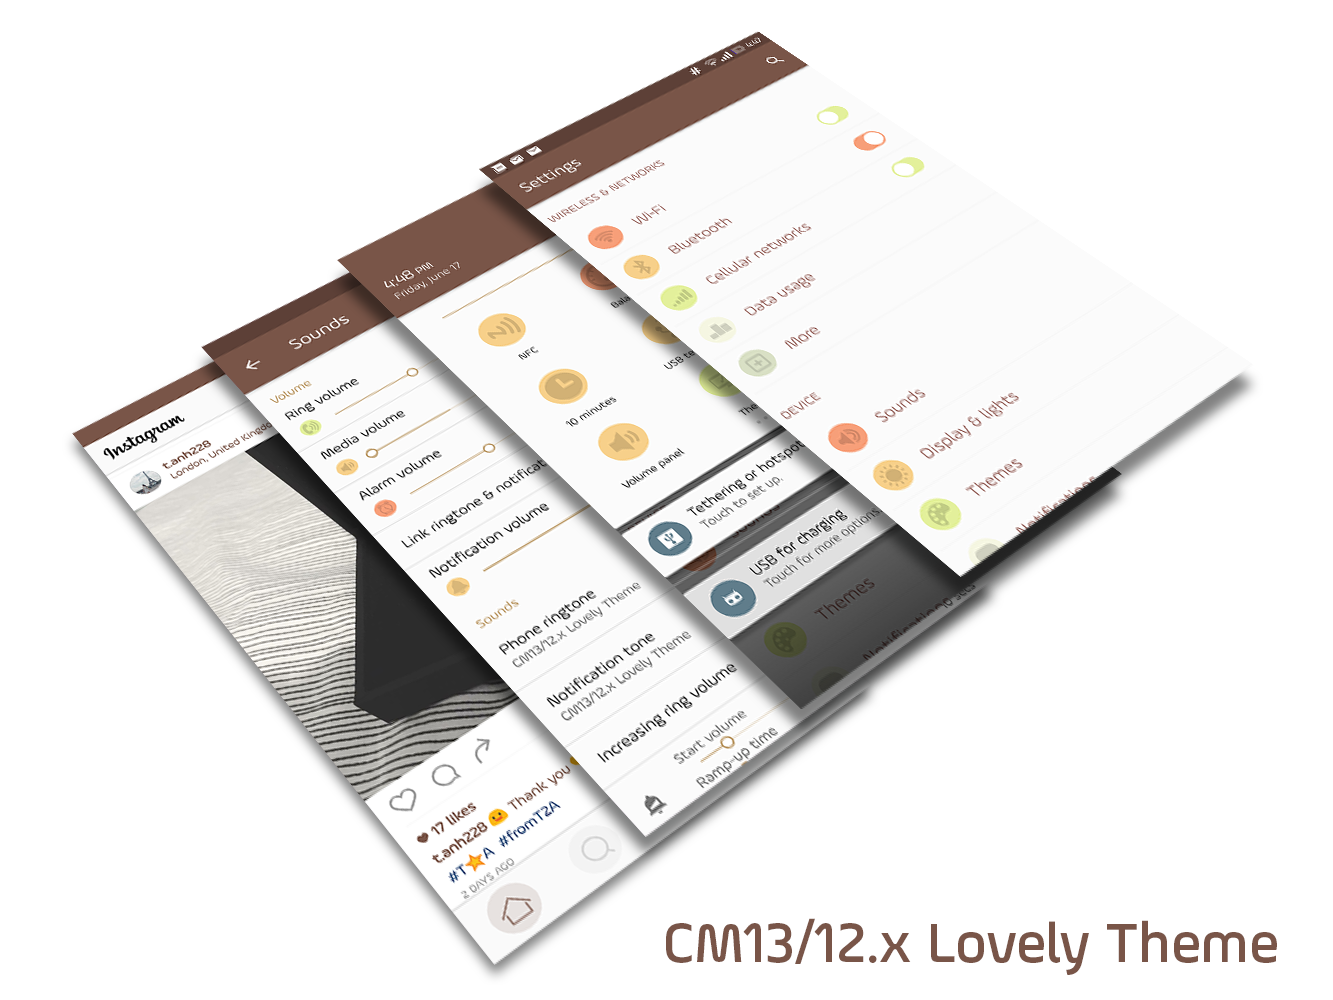 Android application CM13/12.x Lovely Theme screenshort